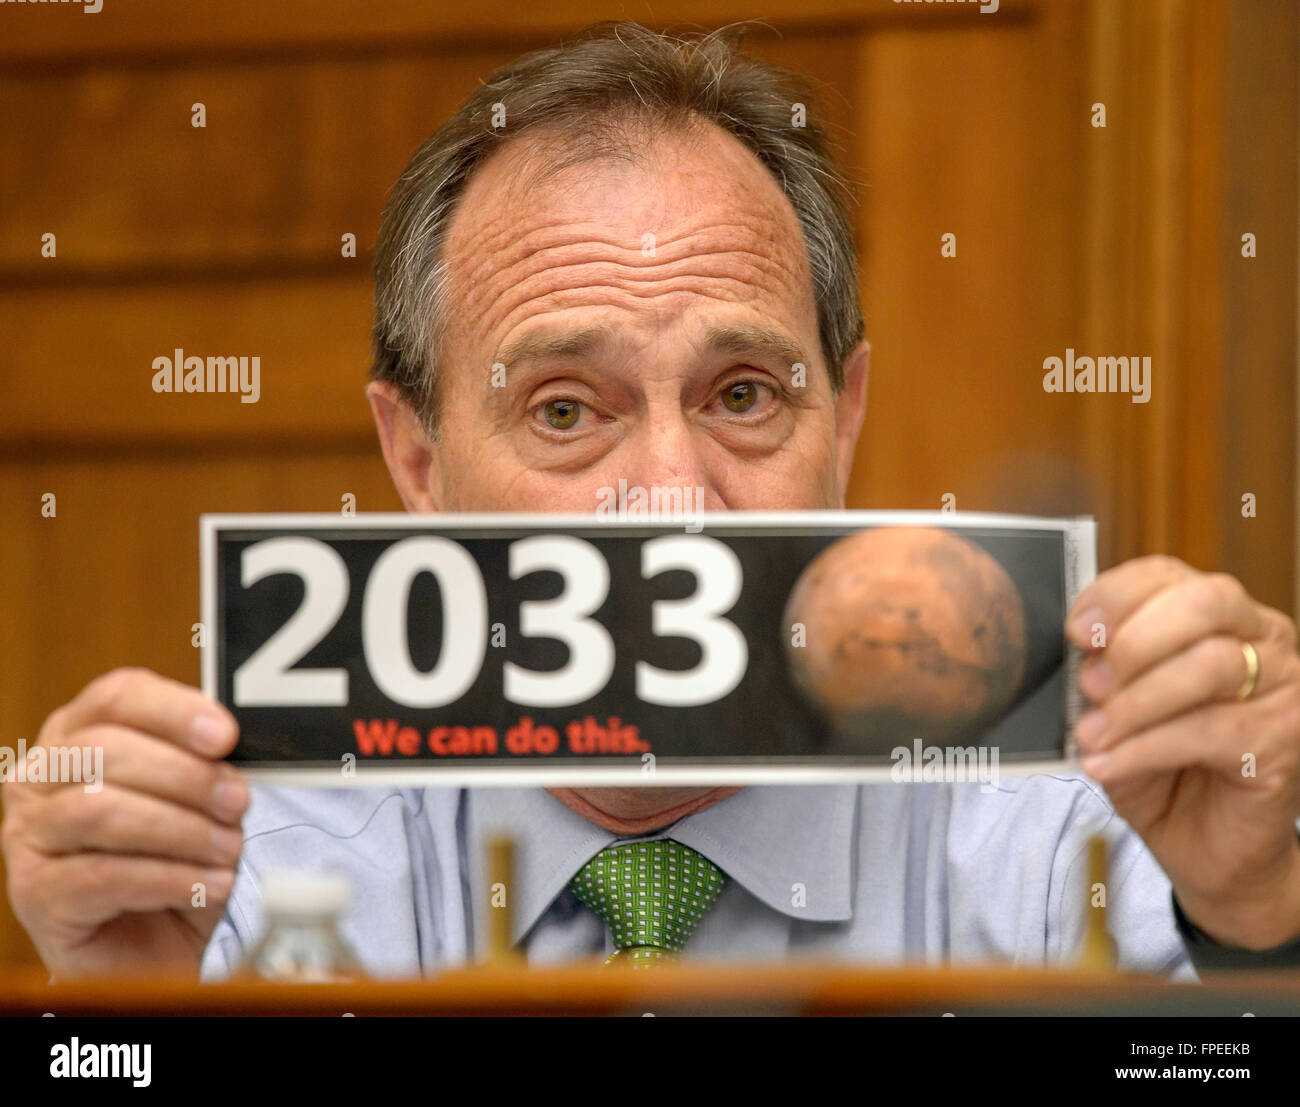 U.S Congressman Ed Perlmutter of Colorado holds up a bumper sticker supporting human missions to mars during the House Committee on Science, Space, and Technology hearing on the budget for the National Aeronautics and Space Administration at the Rayburn House Office Building on Capitol Hill March 17, 2016 in Washington, DC. Stock Photo